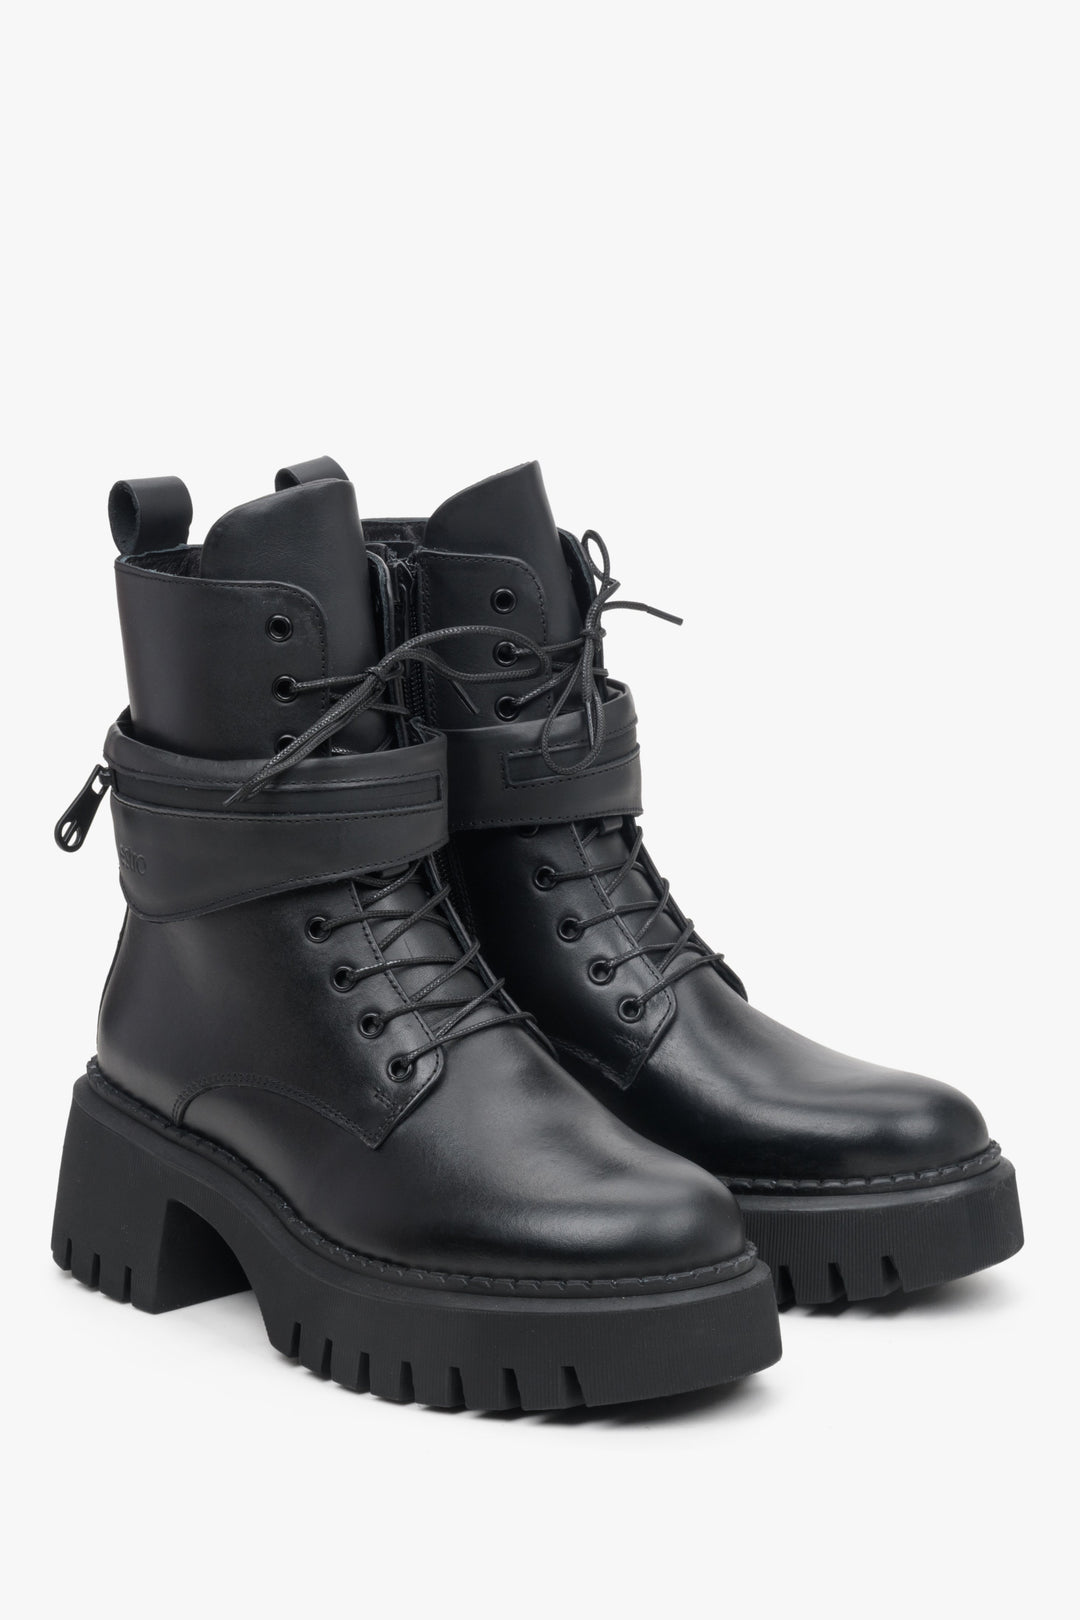 Leather women's winter boots by Estro with a decorative strap.